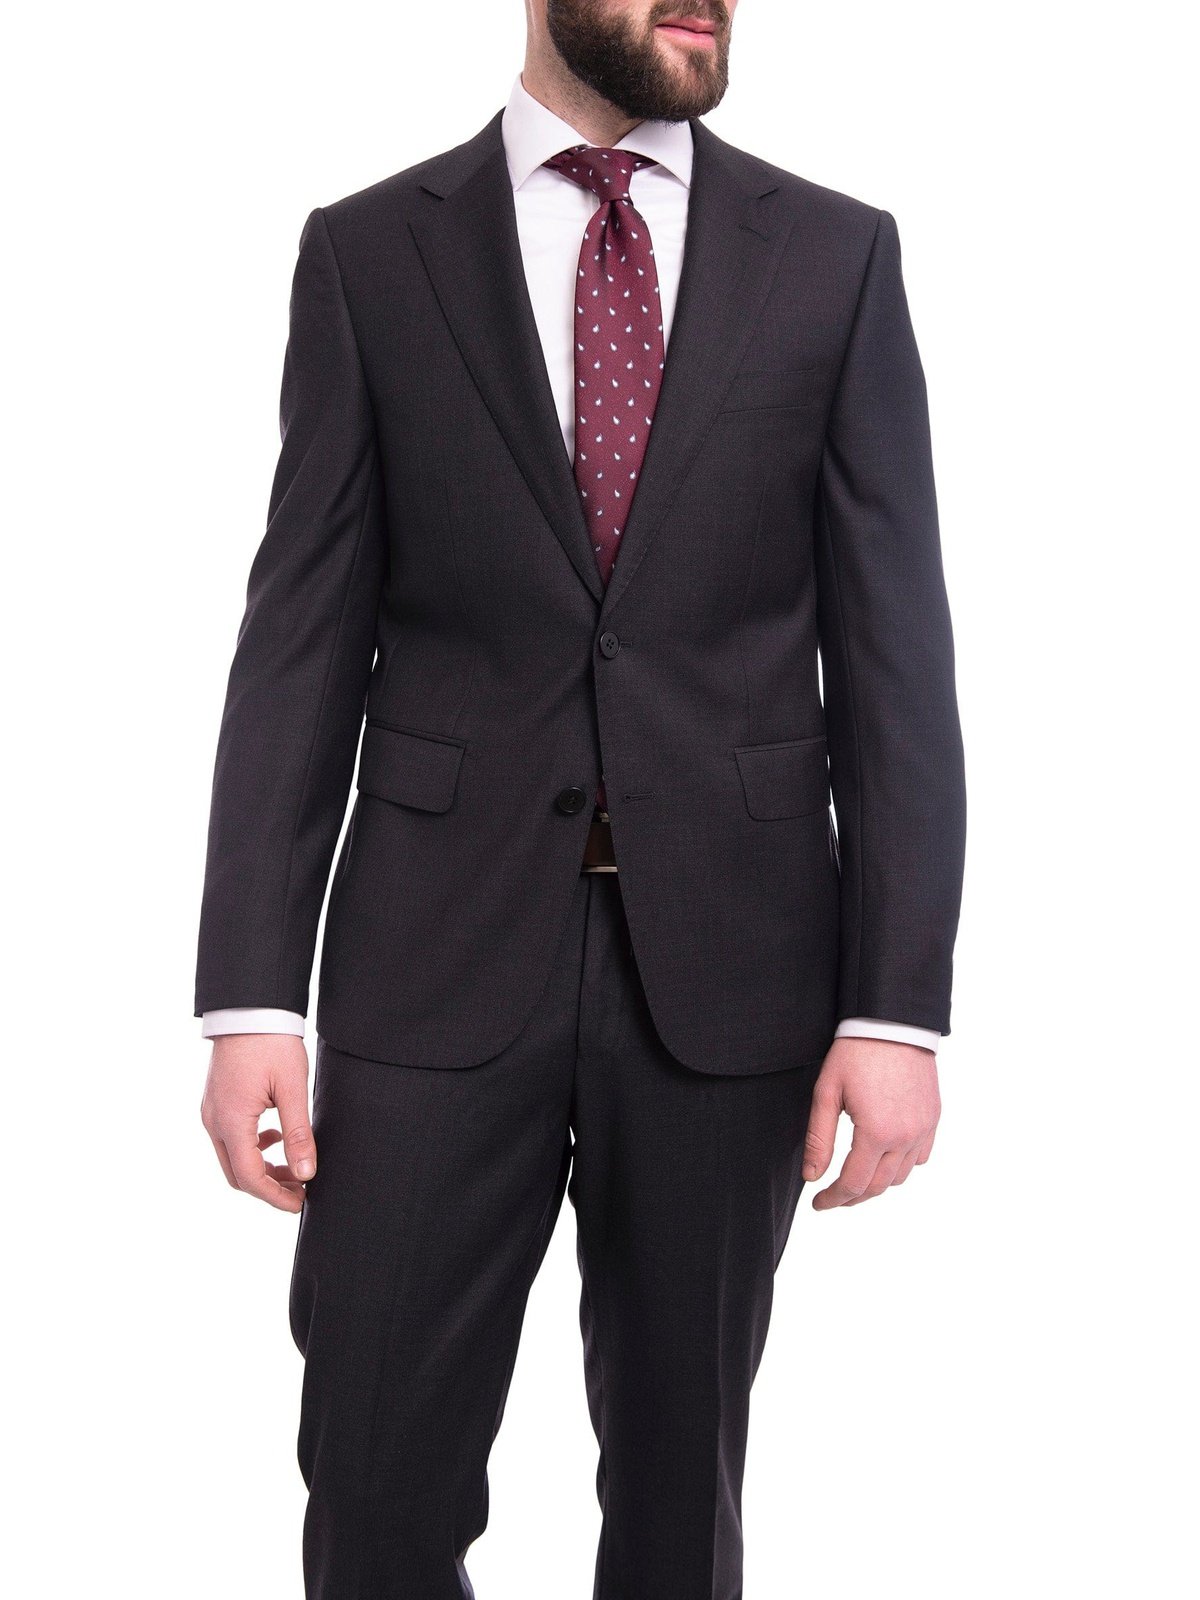 Napoli TWO PIECE SUITS Napoli Slim Fit Charcoal Gray Two Button Half Canvassed Wool Cashmere Suit